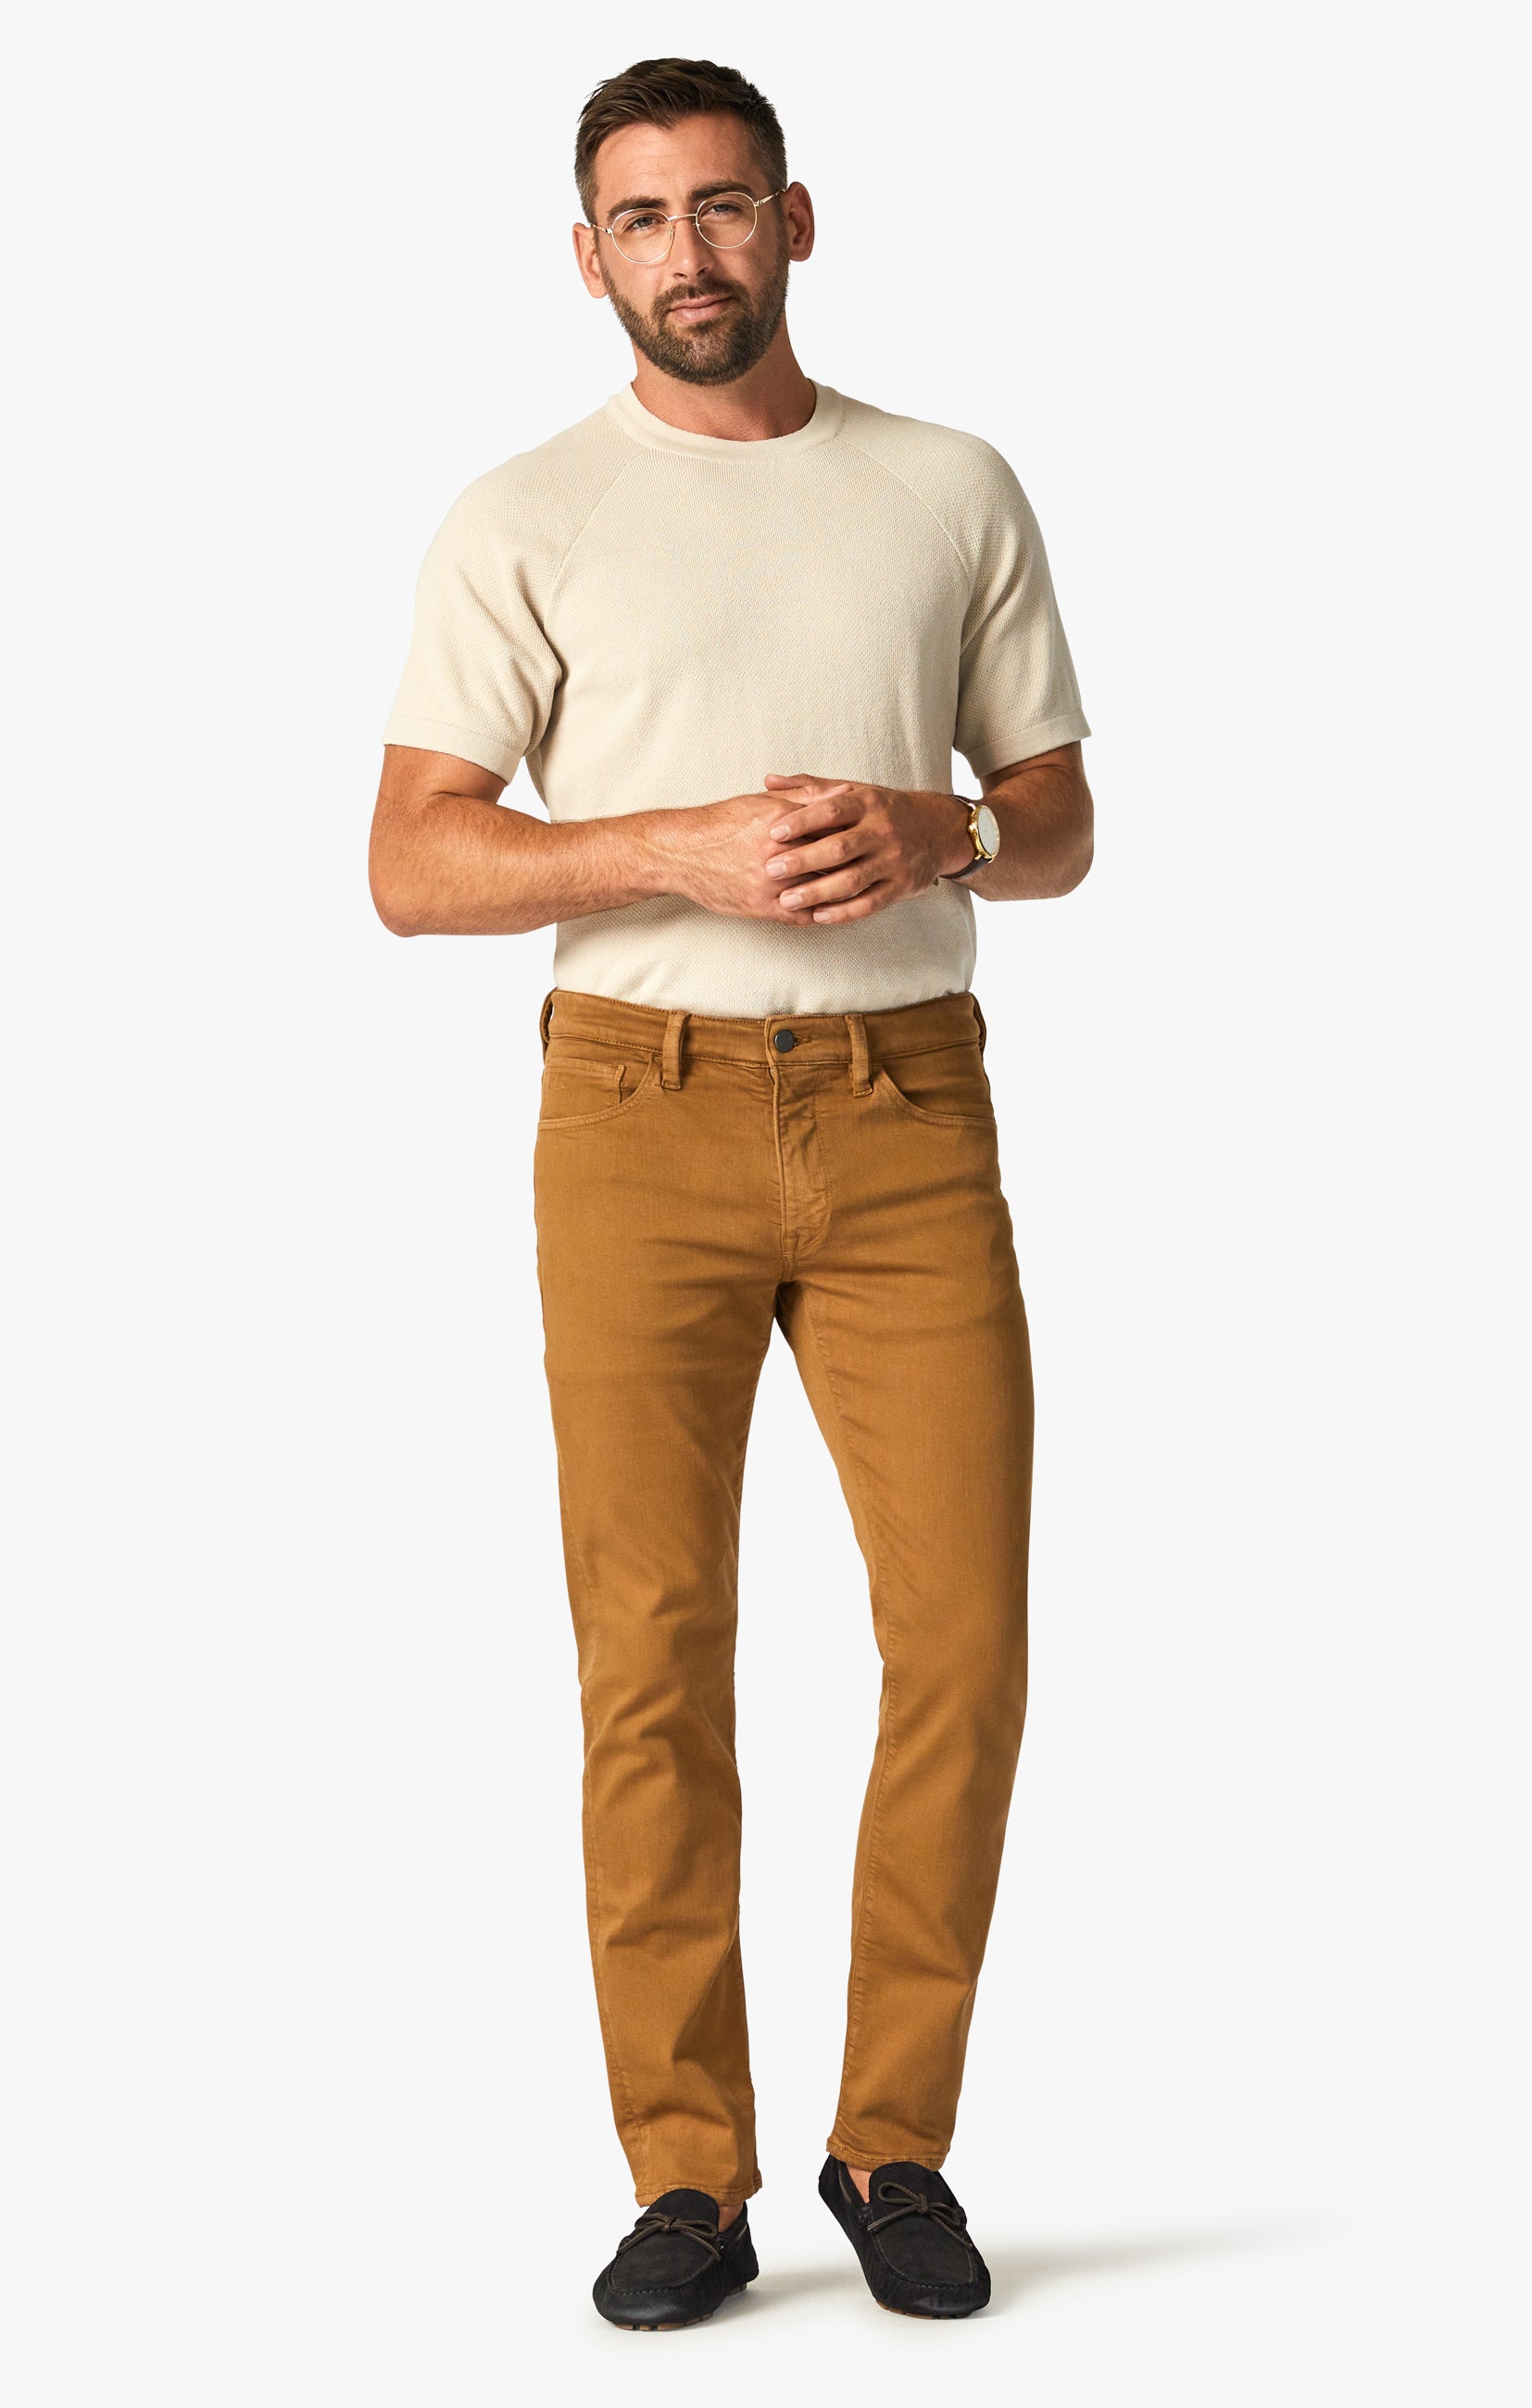 Cool Tapered Leg Pants In Cartouche Comfort